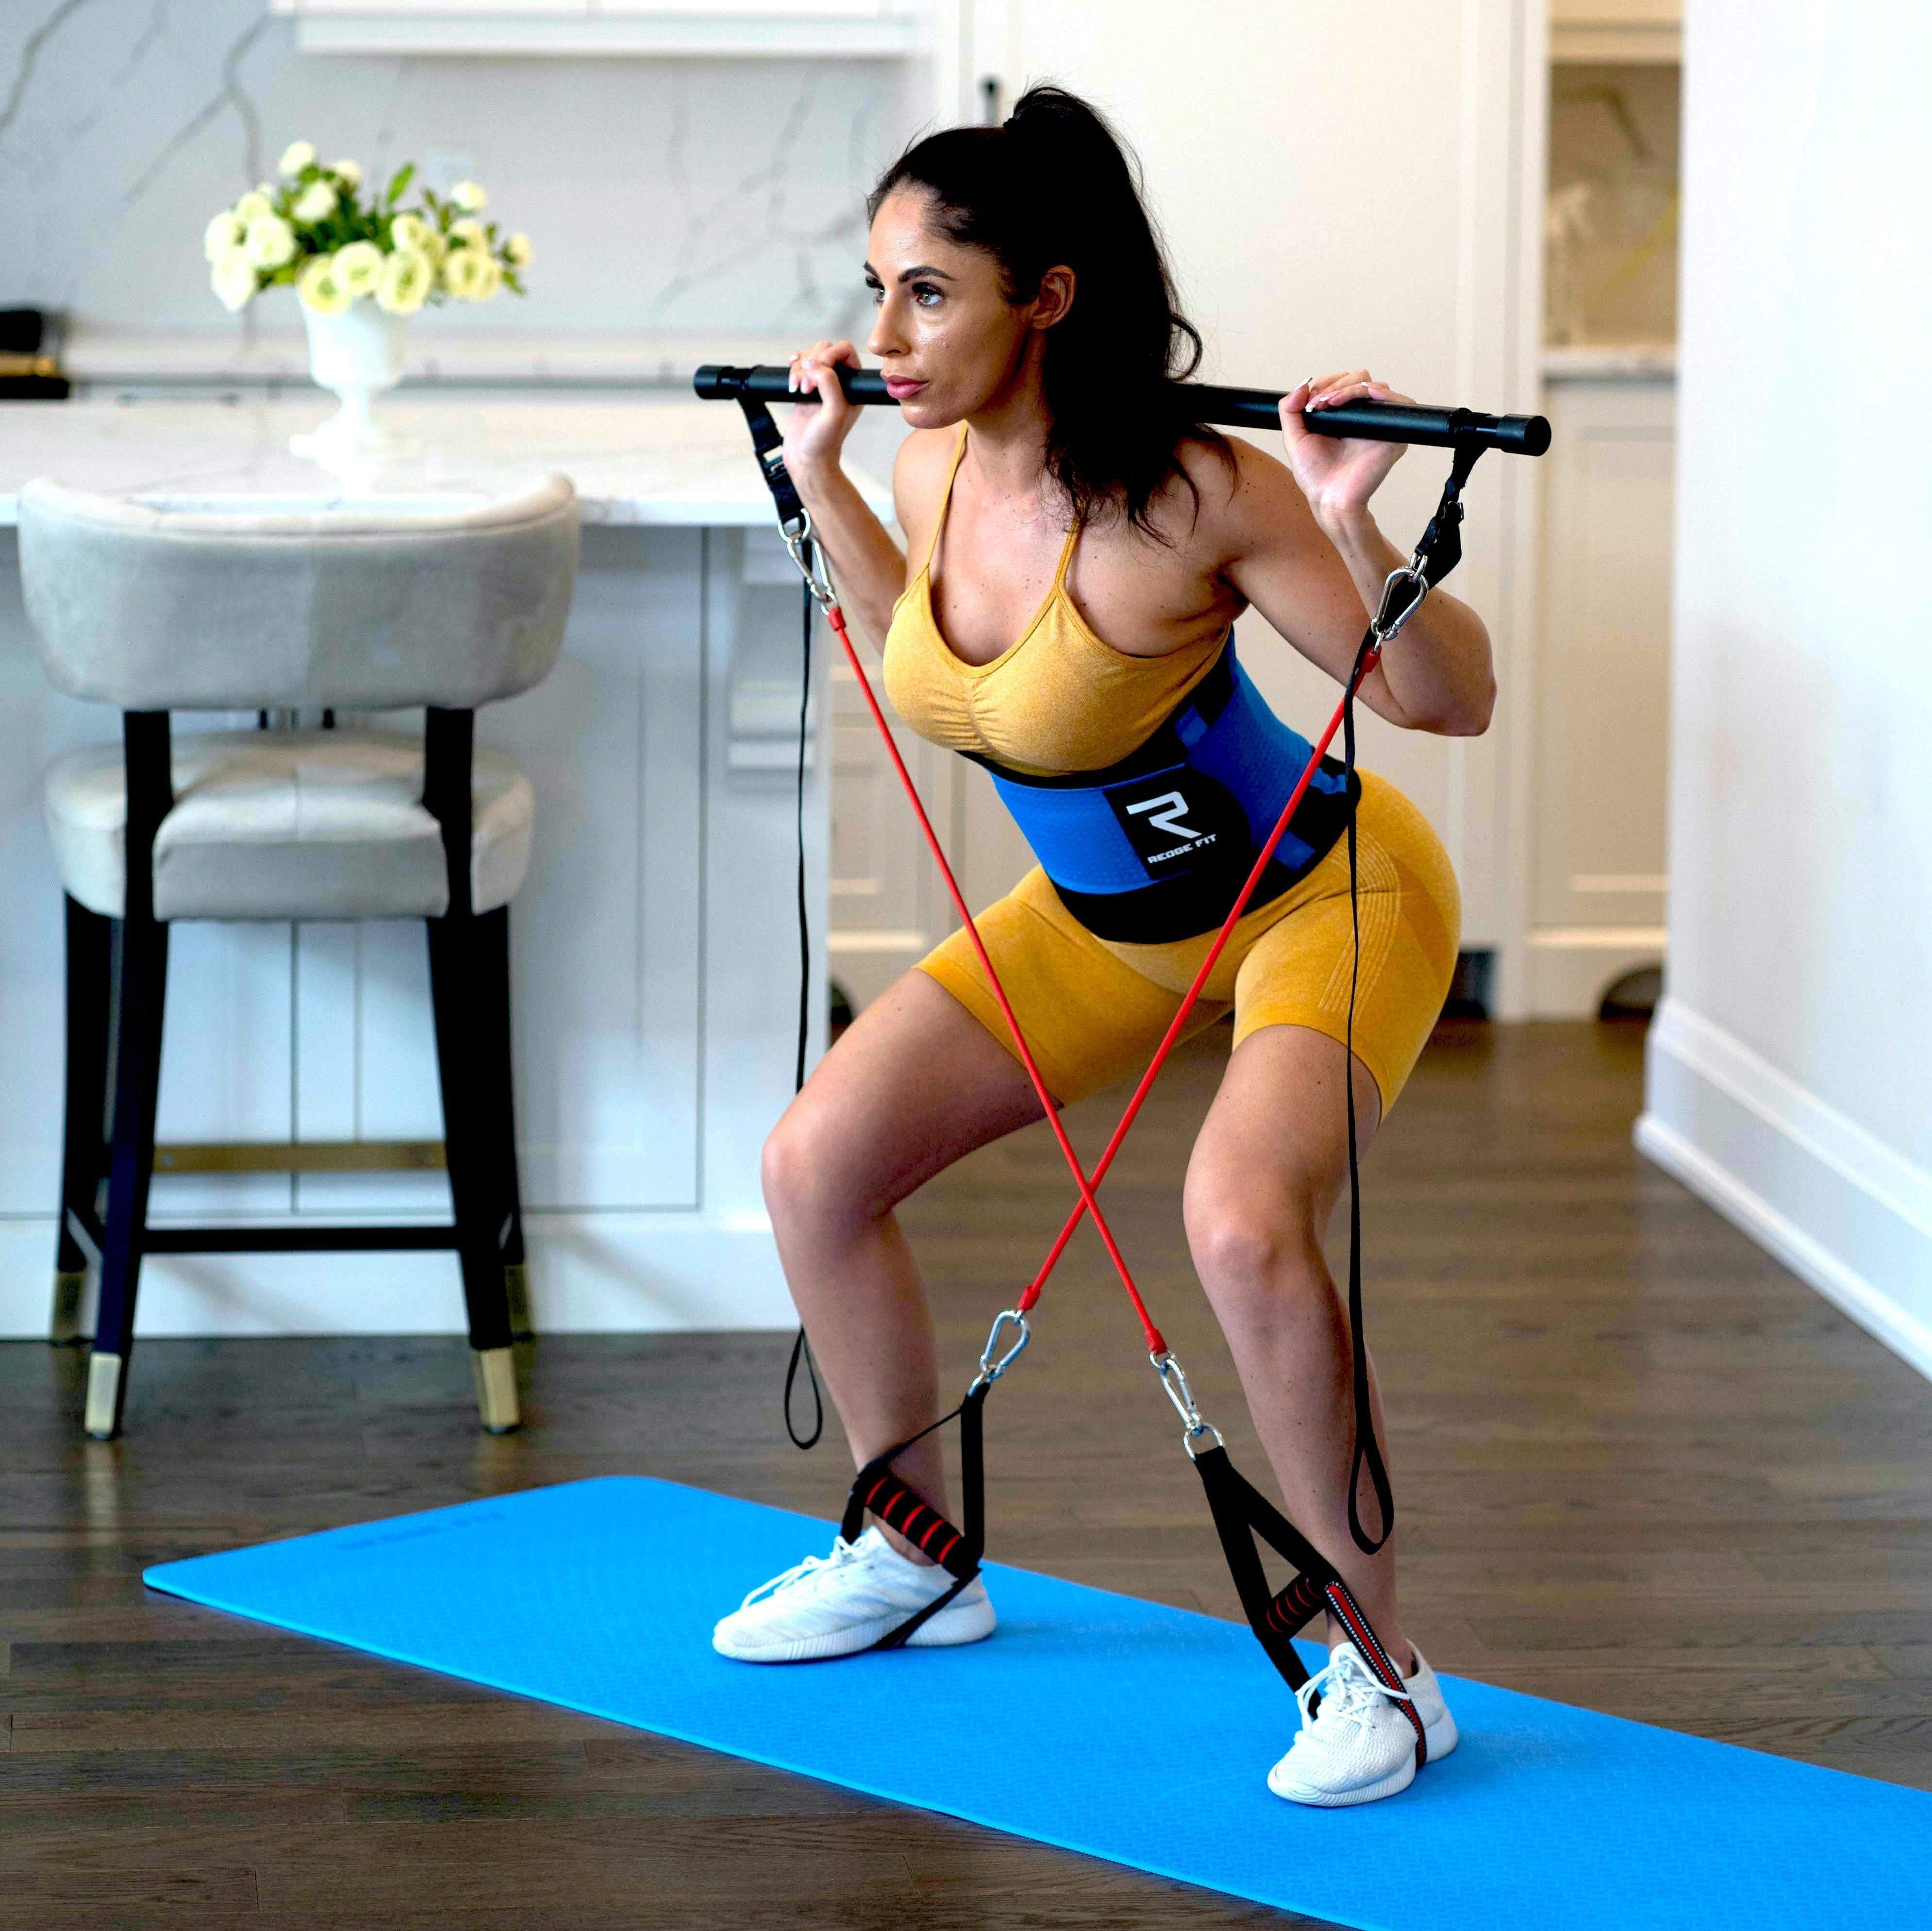 Woman modeling the Redge Fit Home Gym Intermediate Pack Portable Gym Machine Available at https://www.getredge.com/products/home-gym-intermediate-pack